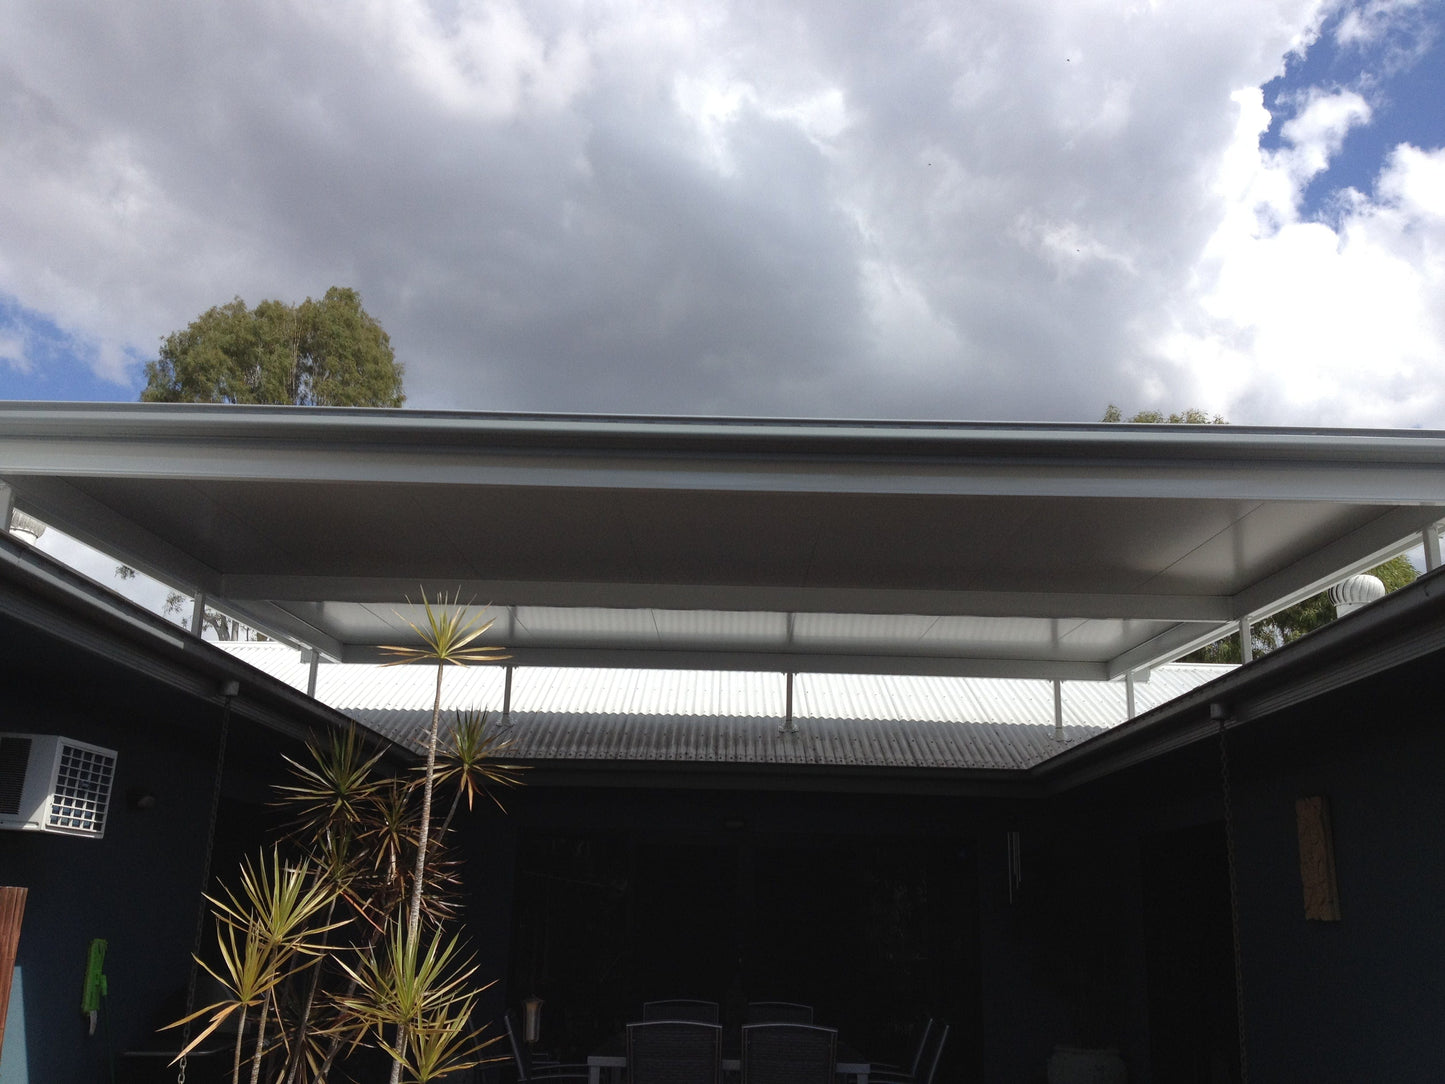 Insulated Flyover Patio Roof- 5m x 3m- Supply & Install QHI National